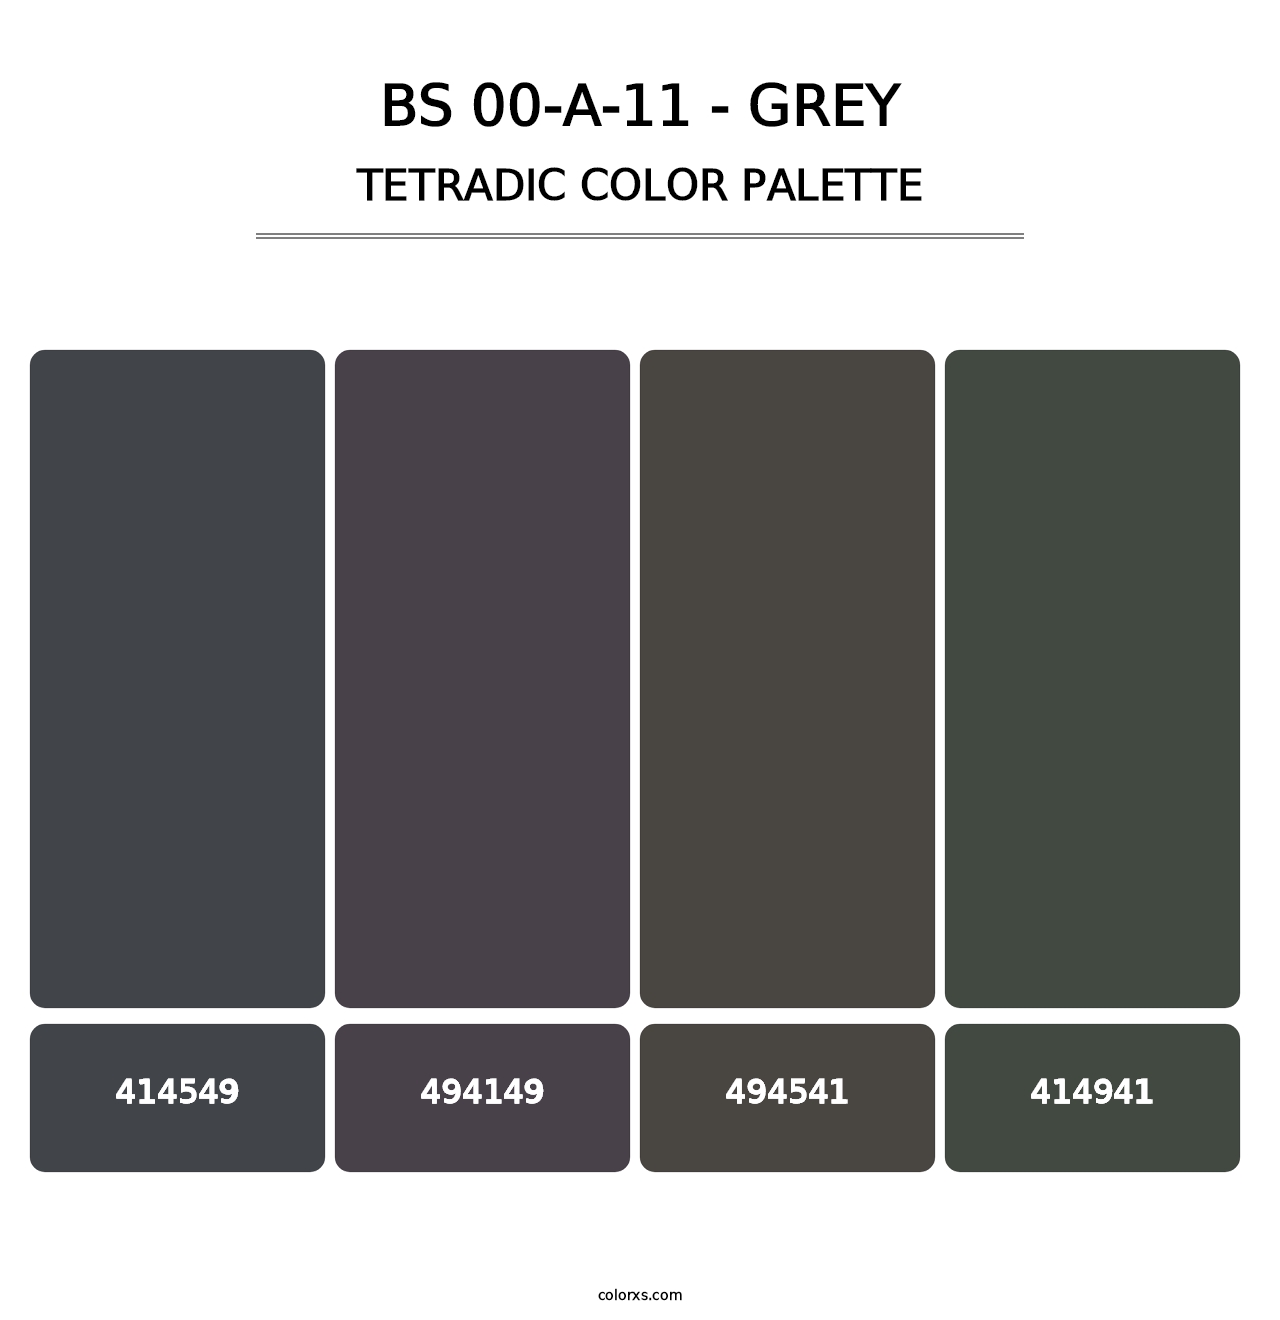 BS 00-A-11 - Grey - Tetradic Color Palette